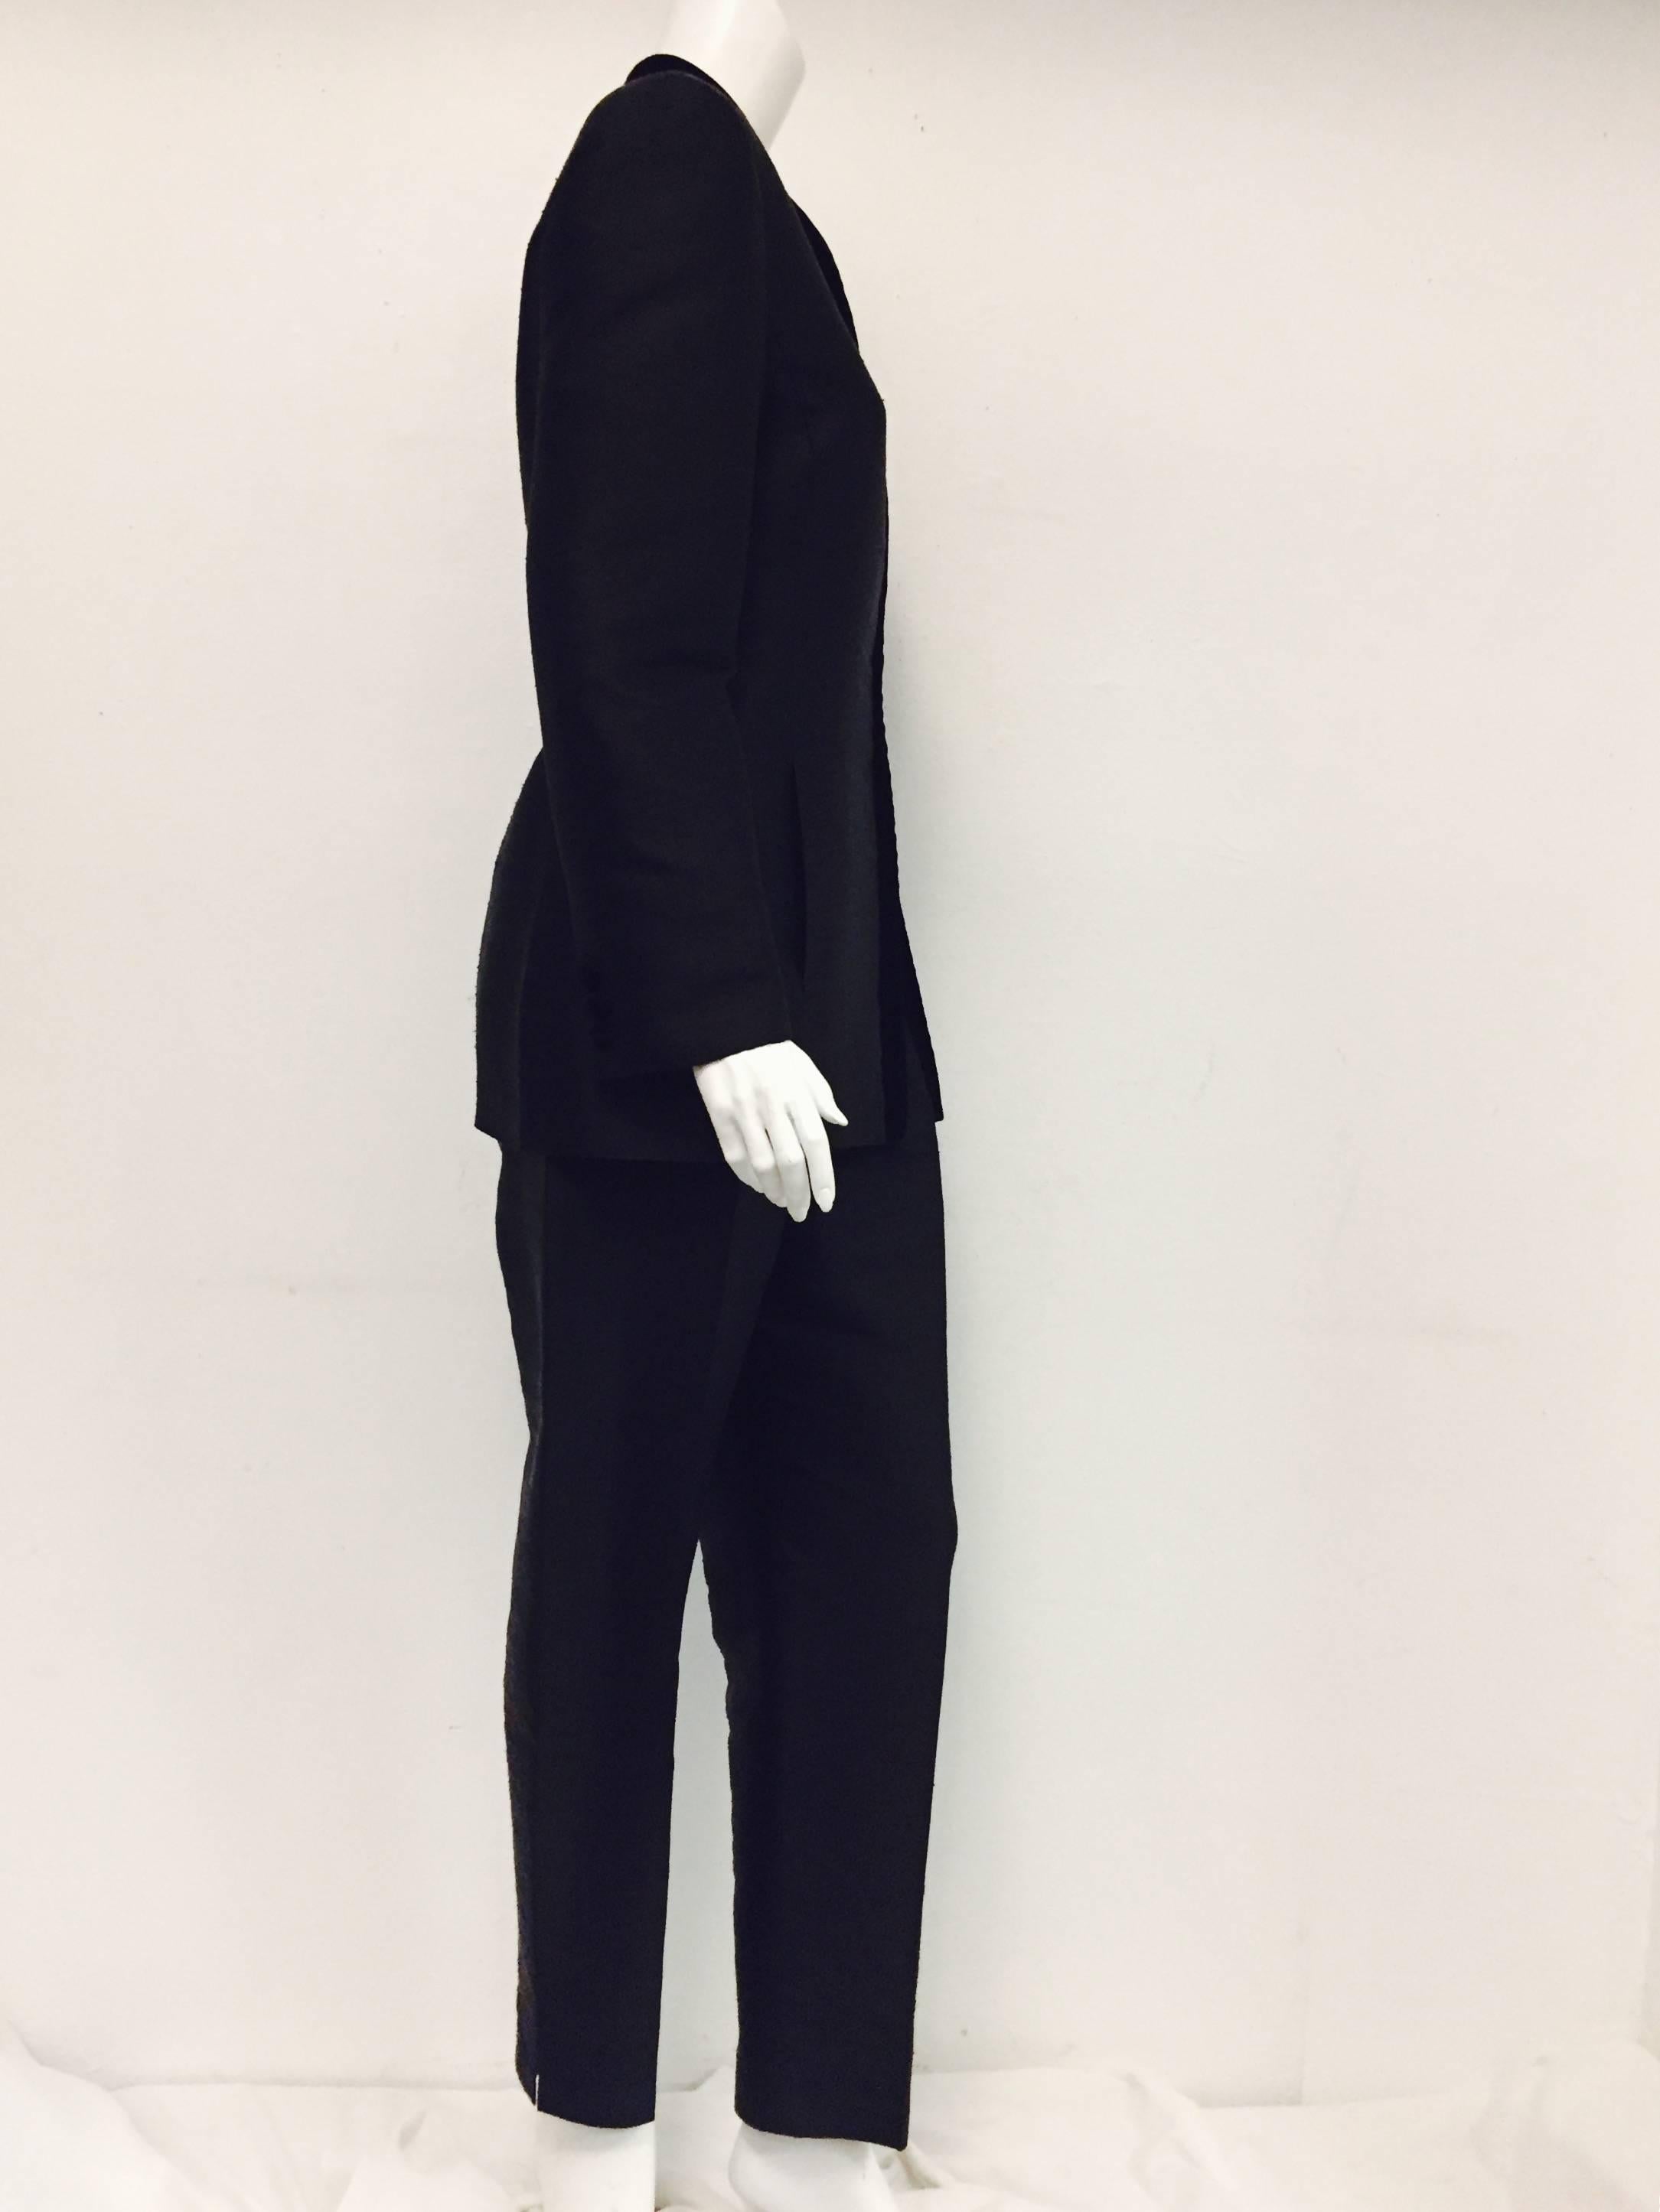 This outstanding Oscar de la Renta Vintage raw silk pant suit is perfect for any occasion night or day!  The Nehru collar as well as the front opening of the suit jacket has 1 1/4